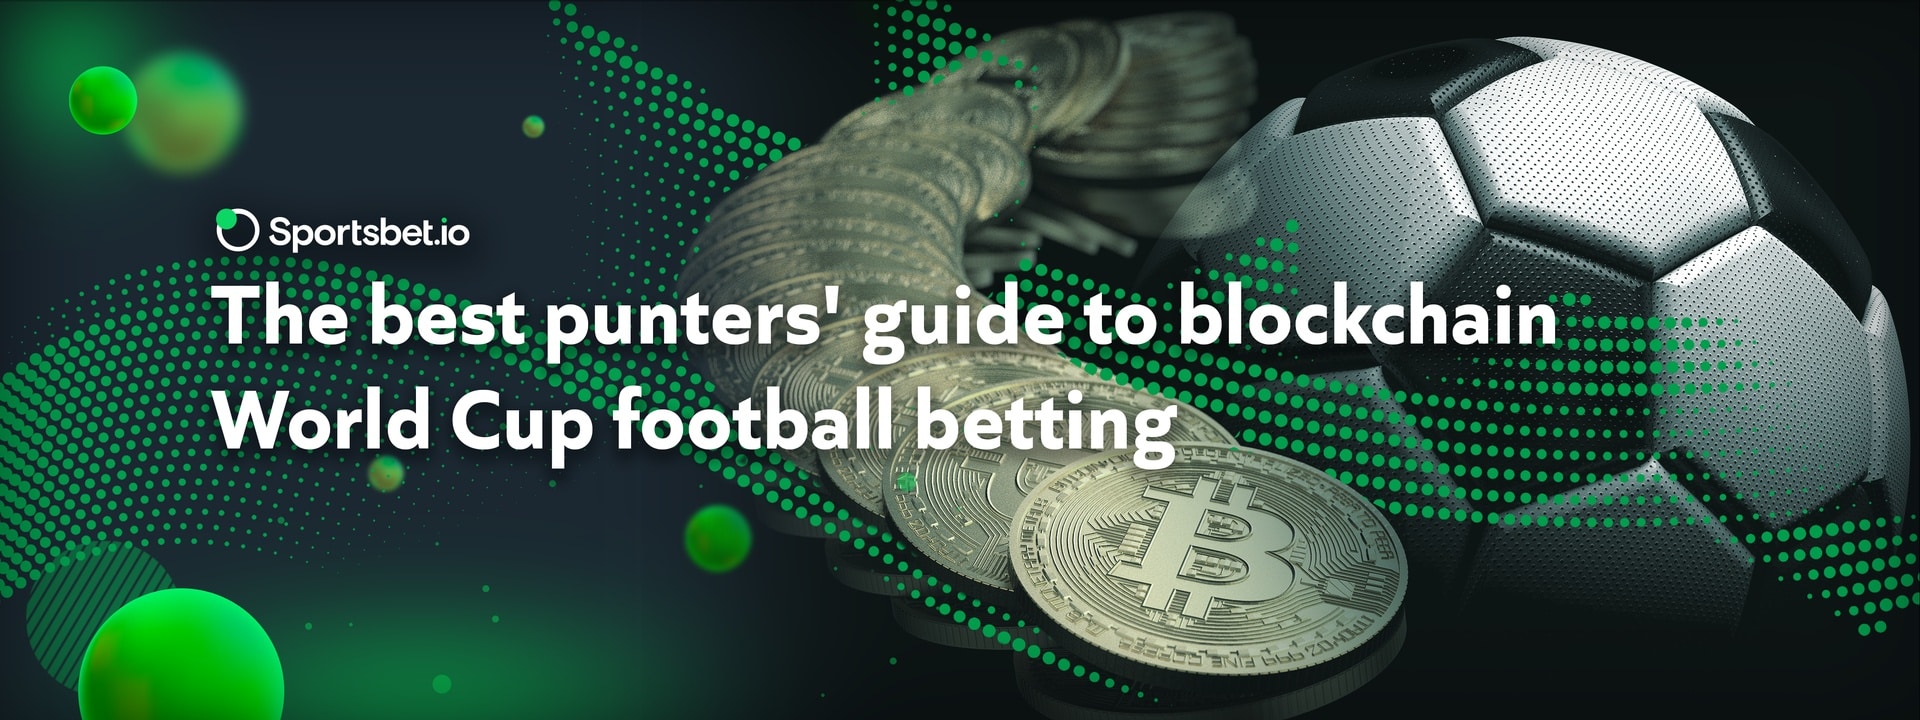 The best punters' guide to blockchain World Cup football betting - Sportsbet.io